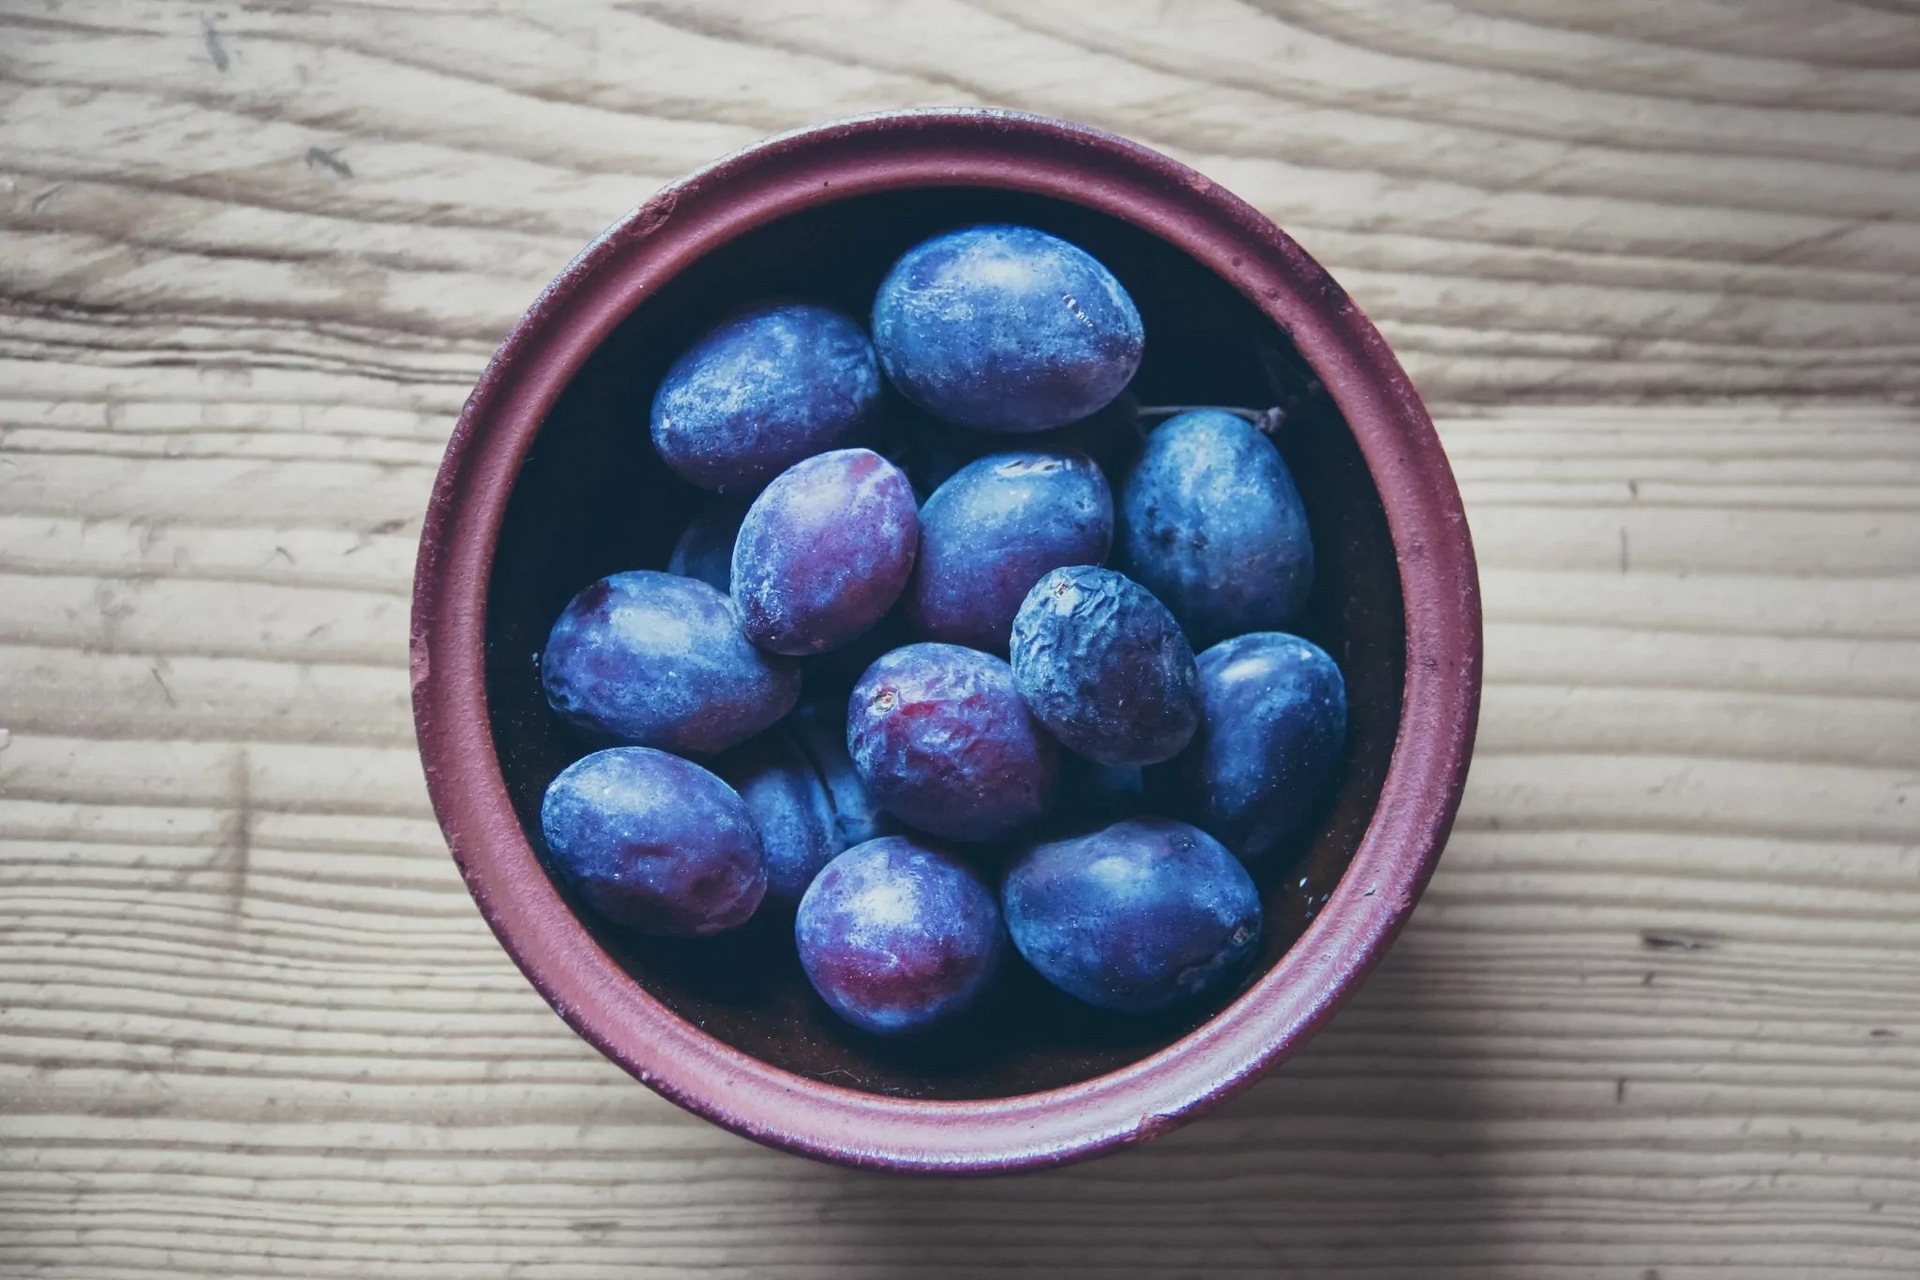 6 Reasons Plums Should Be Your Favorite Fruit This Fall